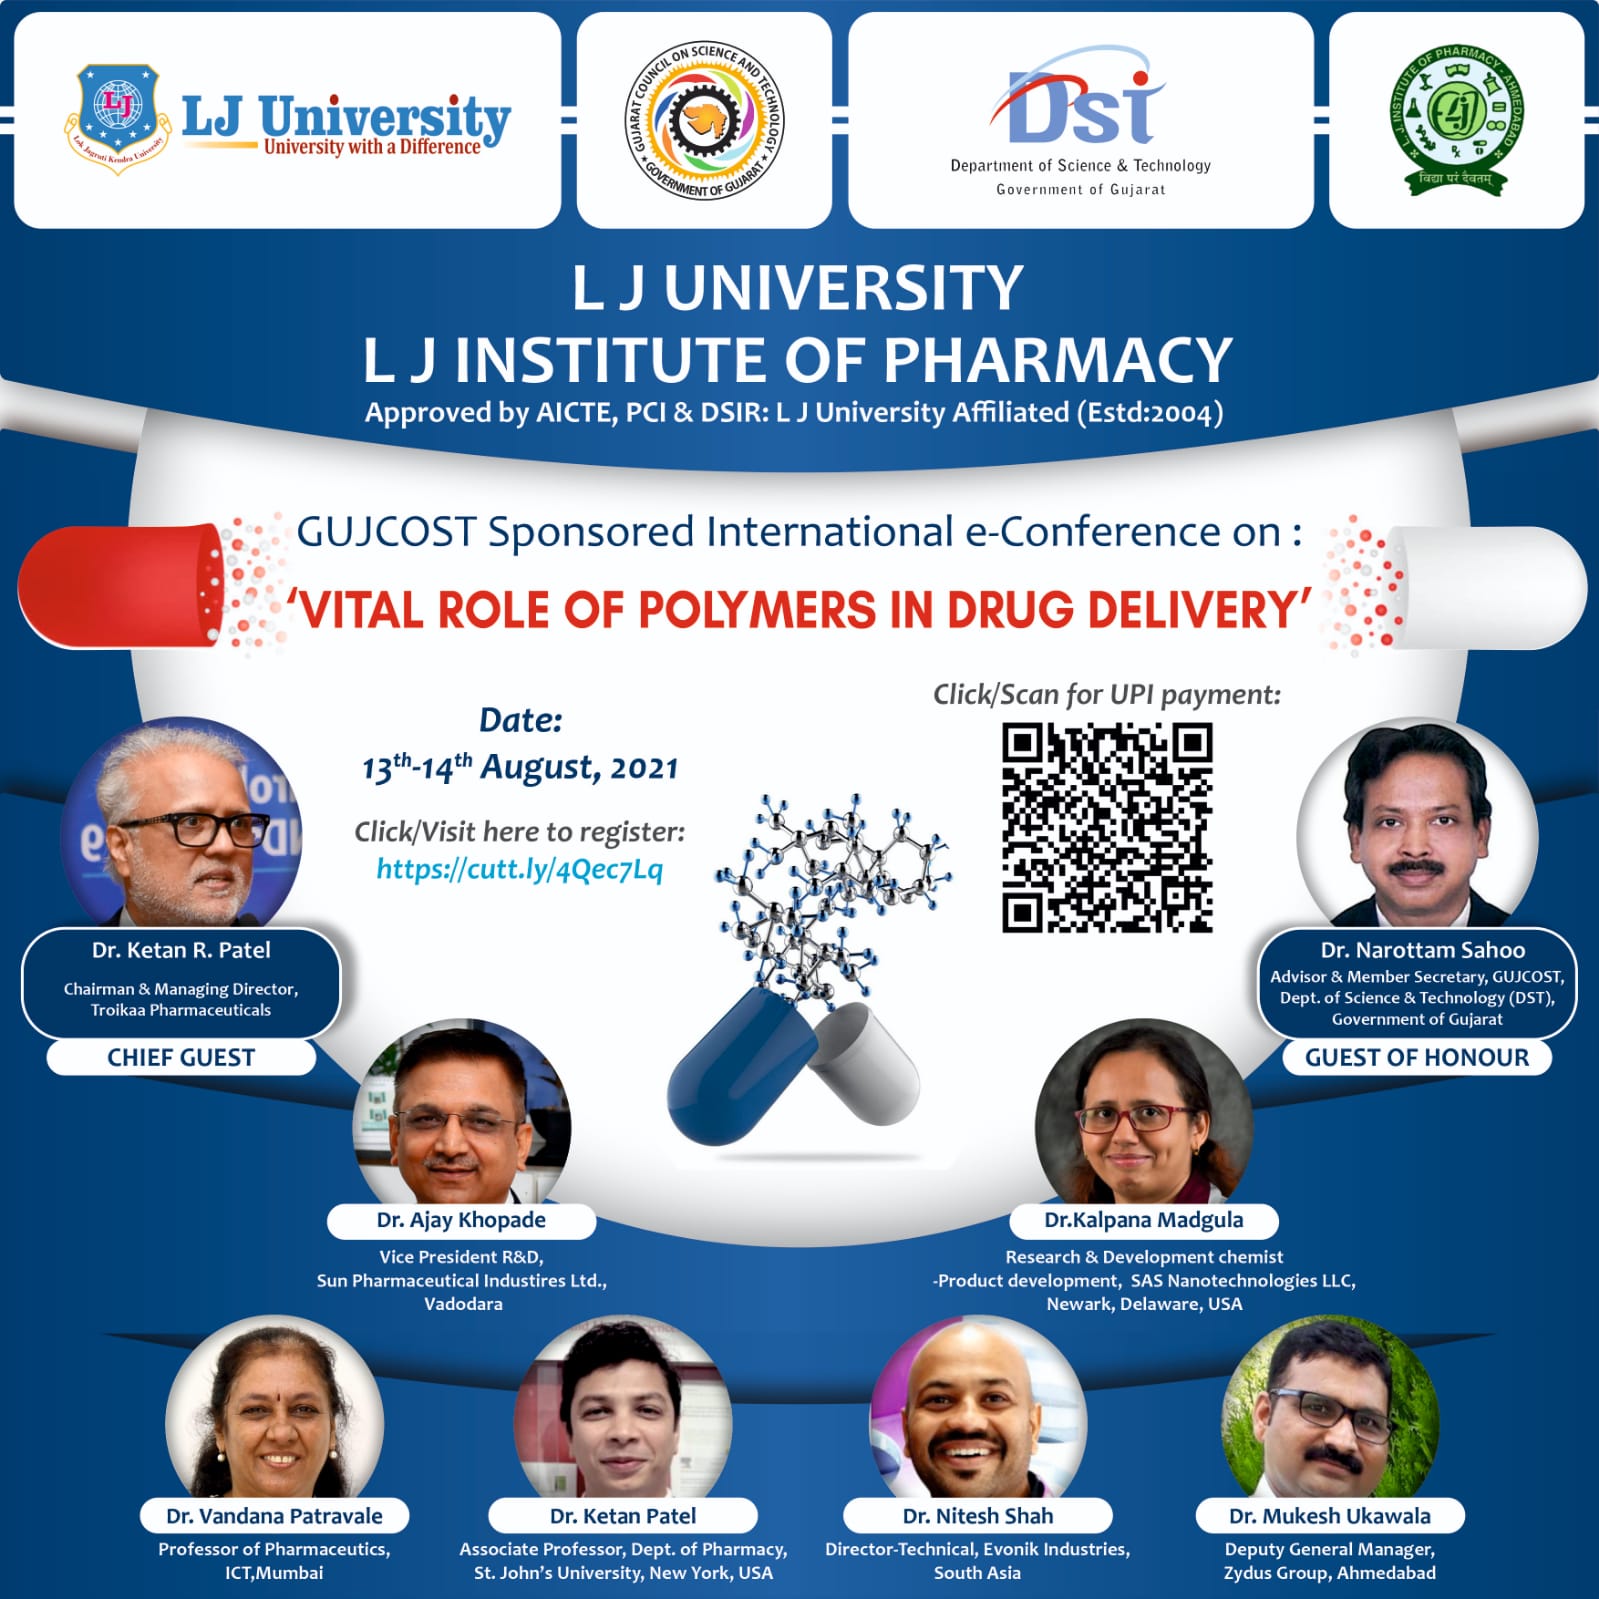 GUJCOST sponsored two-day International e-conference on “Vital Role of Polymers in Drug Delivery”